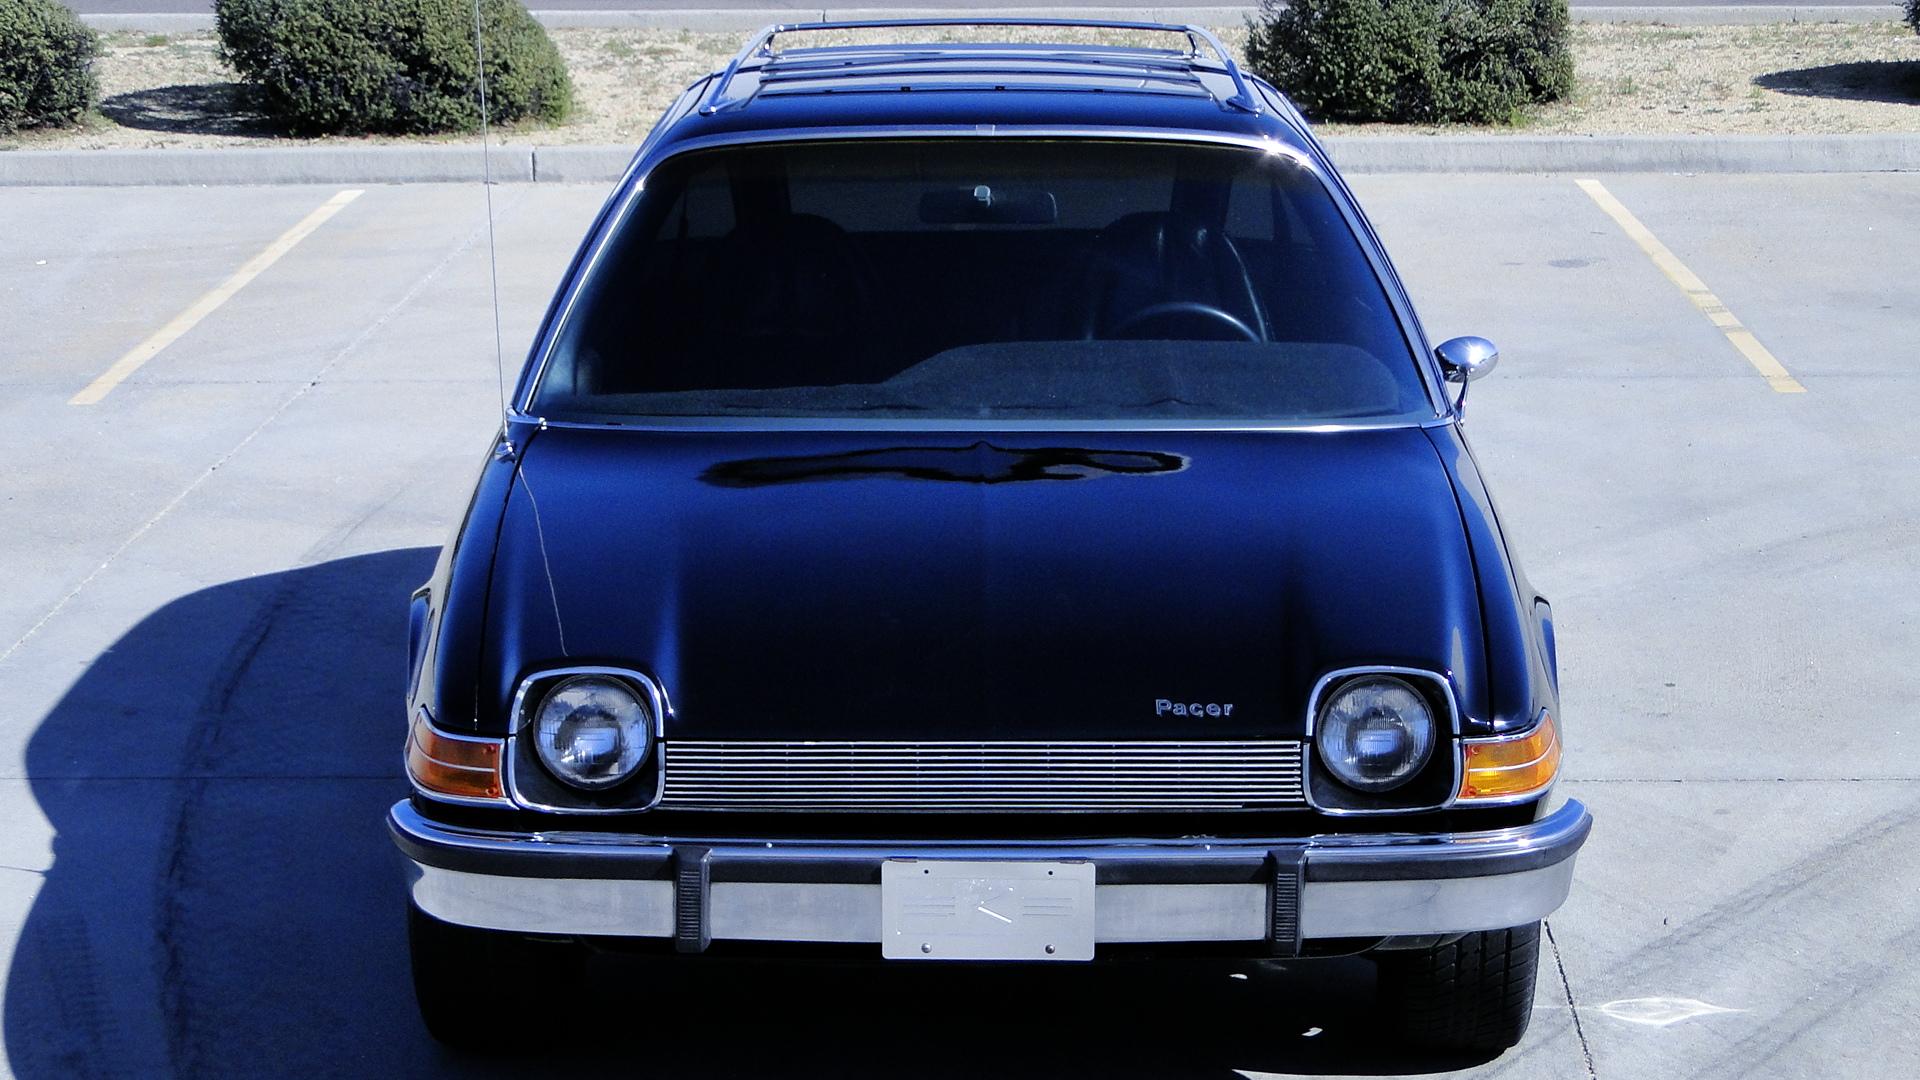 1976 AMC Pacer X up for auction looks bad in black | Autoblog